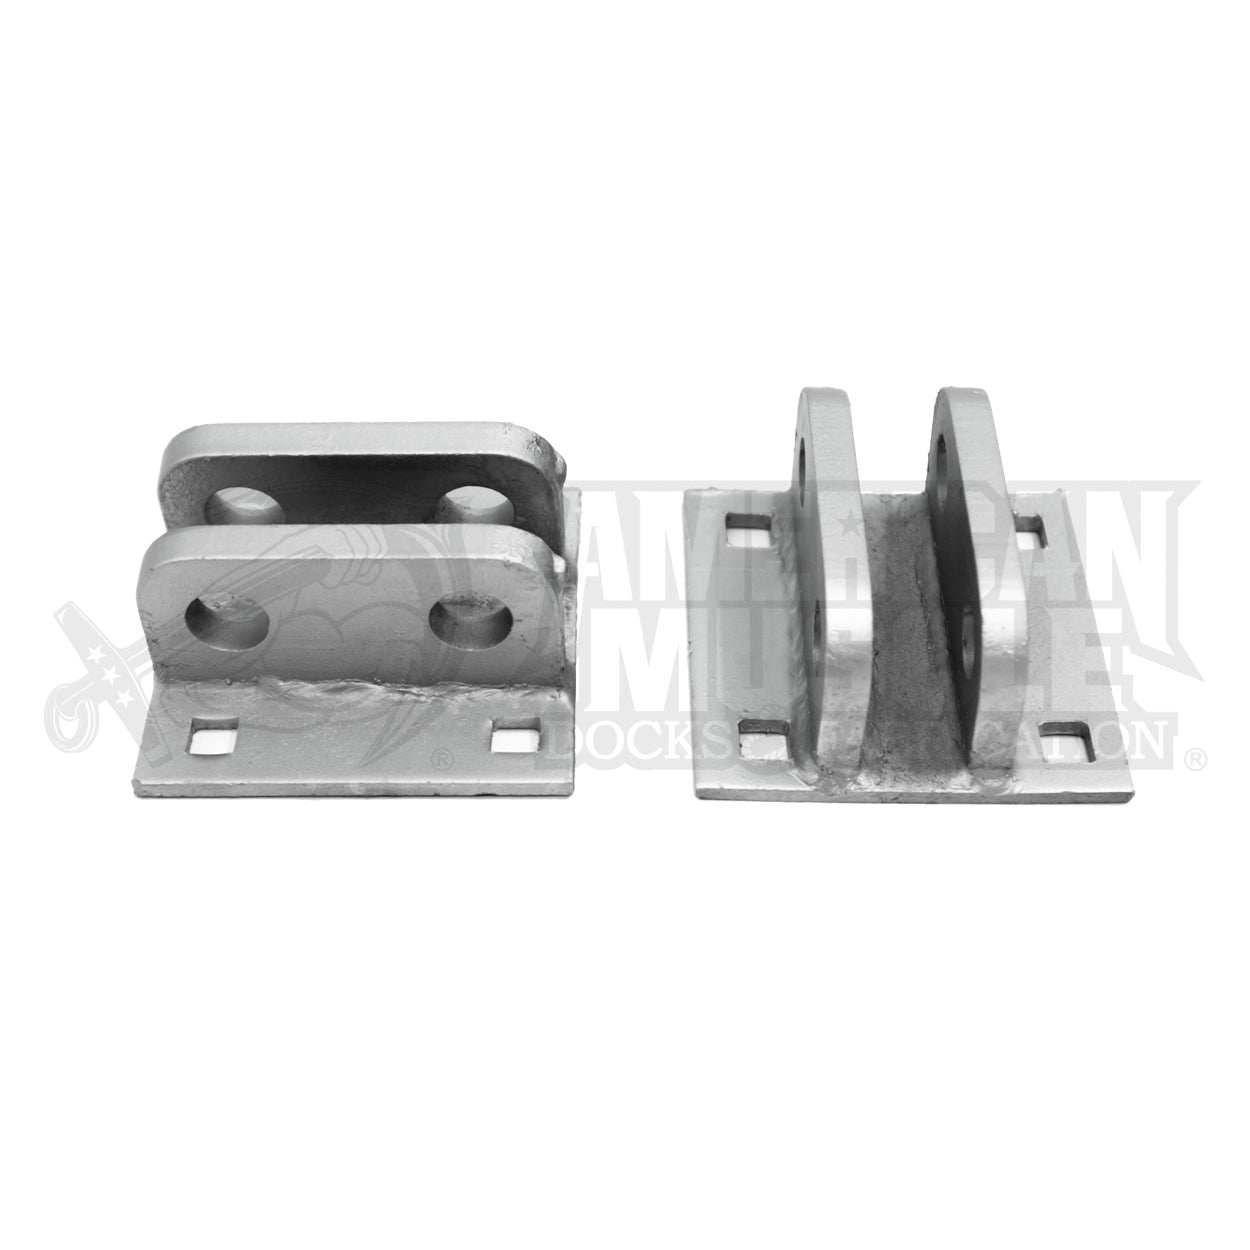 Non-Articulating Double Pin Bracket - Boat Dock Hardware